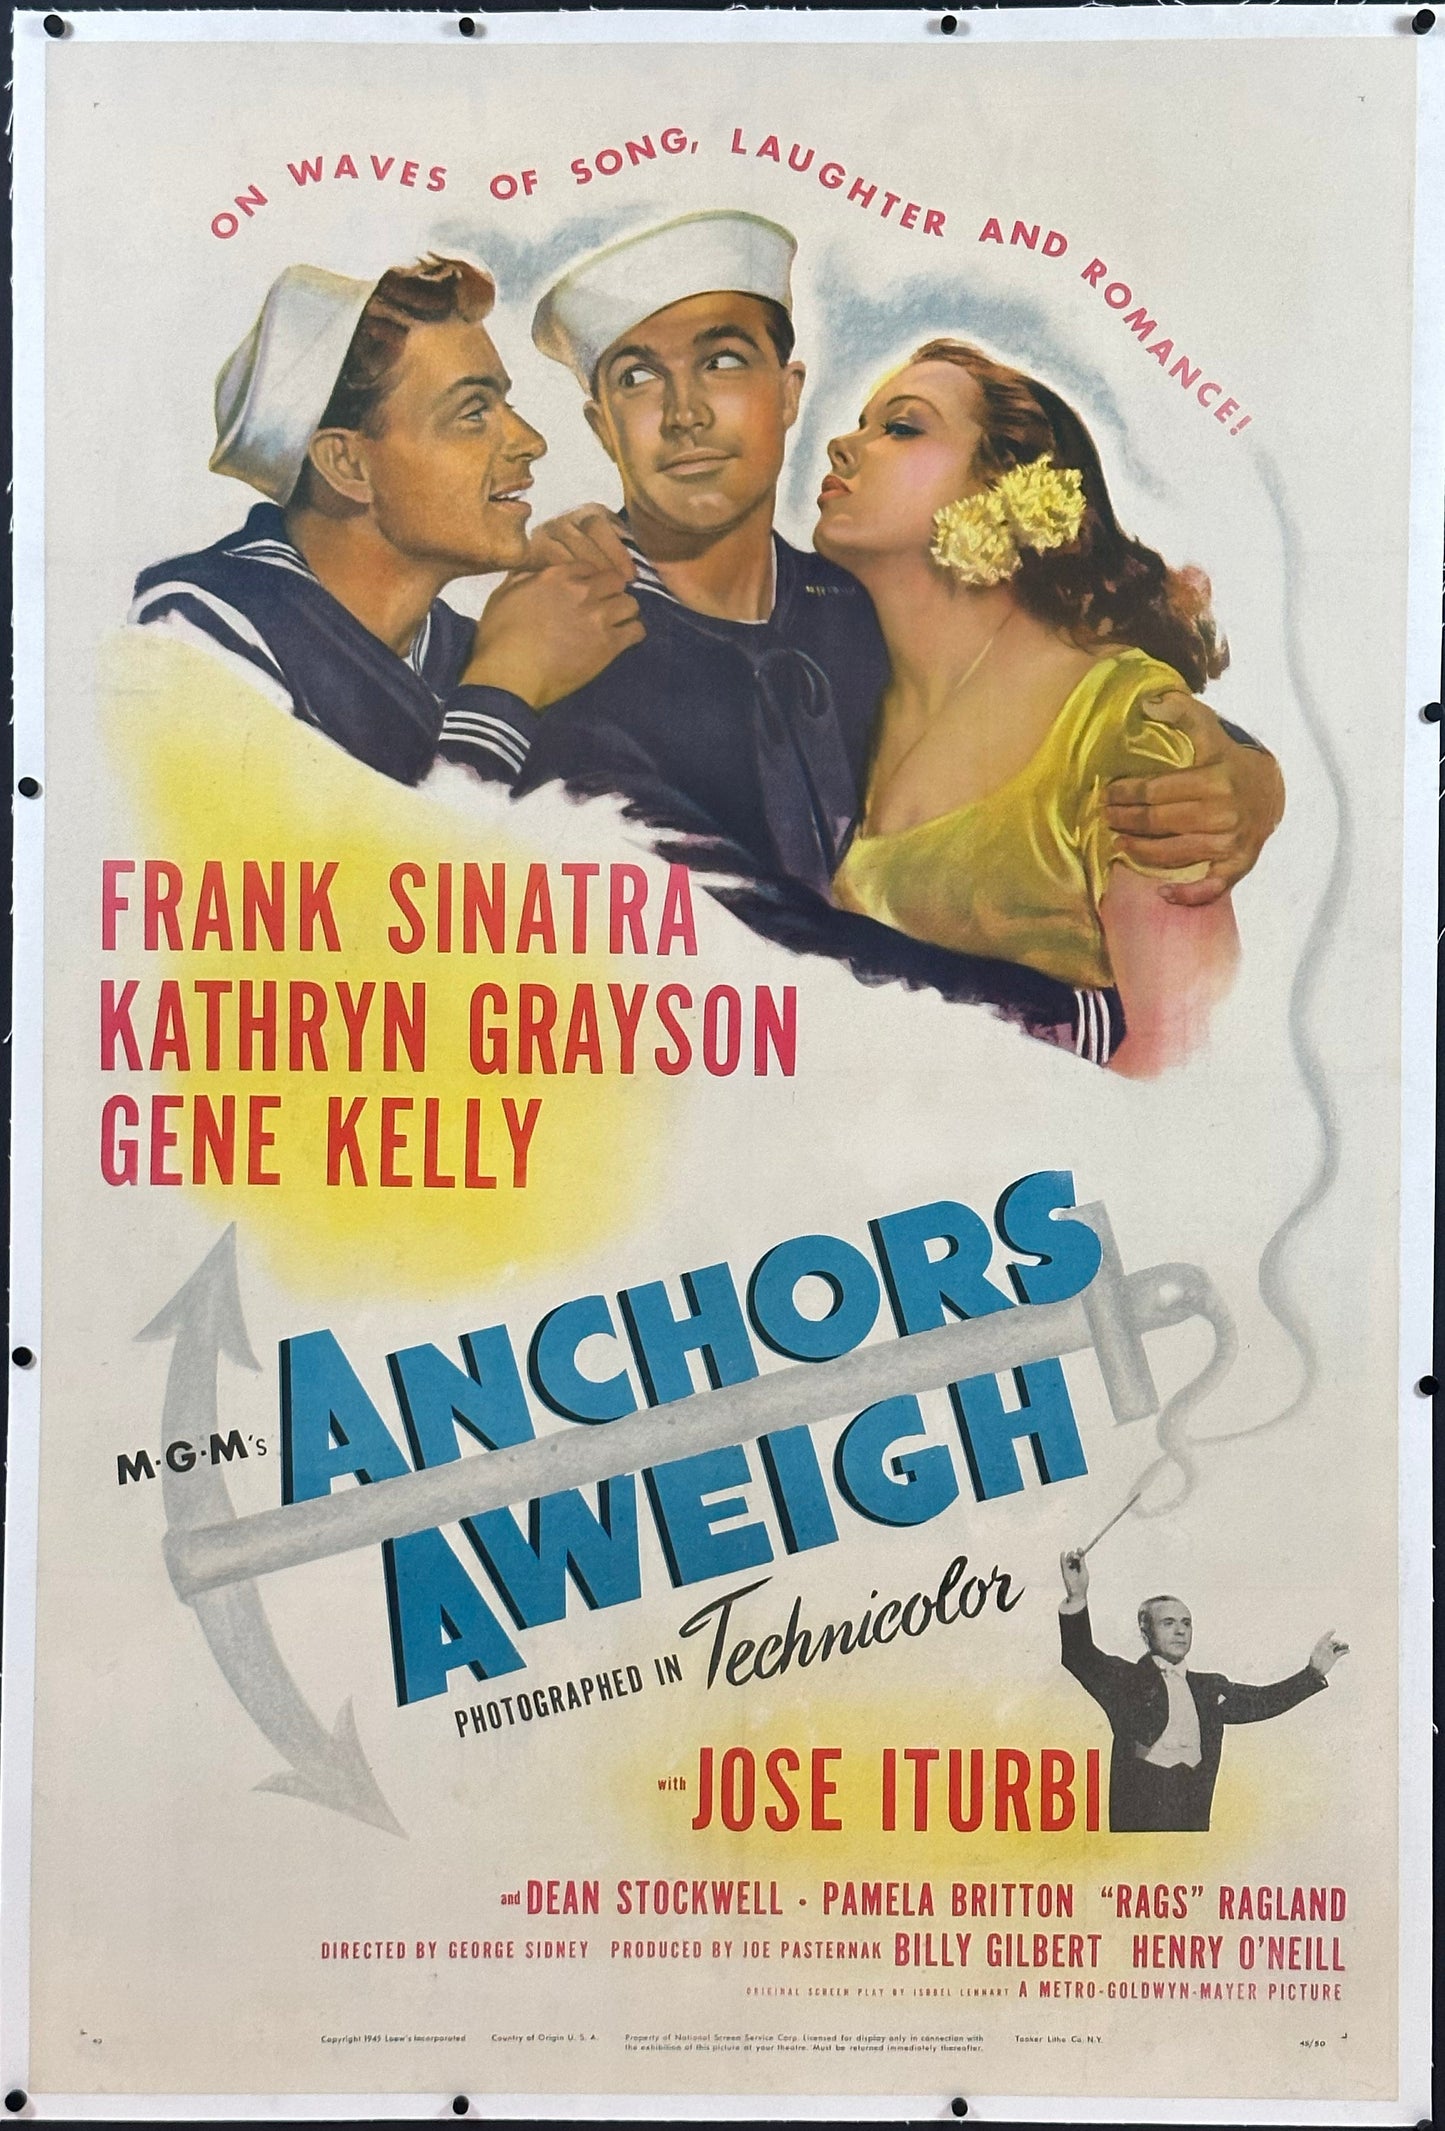 Anchors Aweigh US One Sheet (1945) - ORIGINAL RELEASE - posterpalace.com